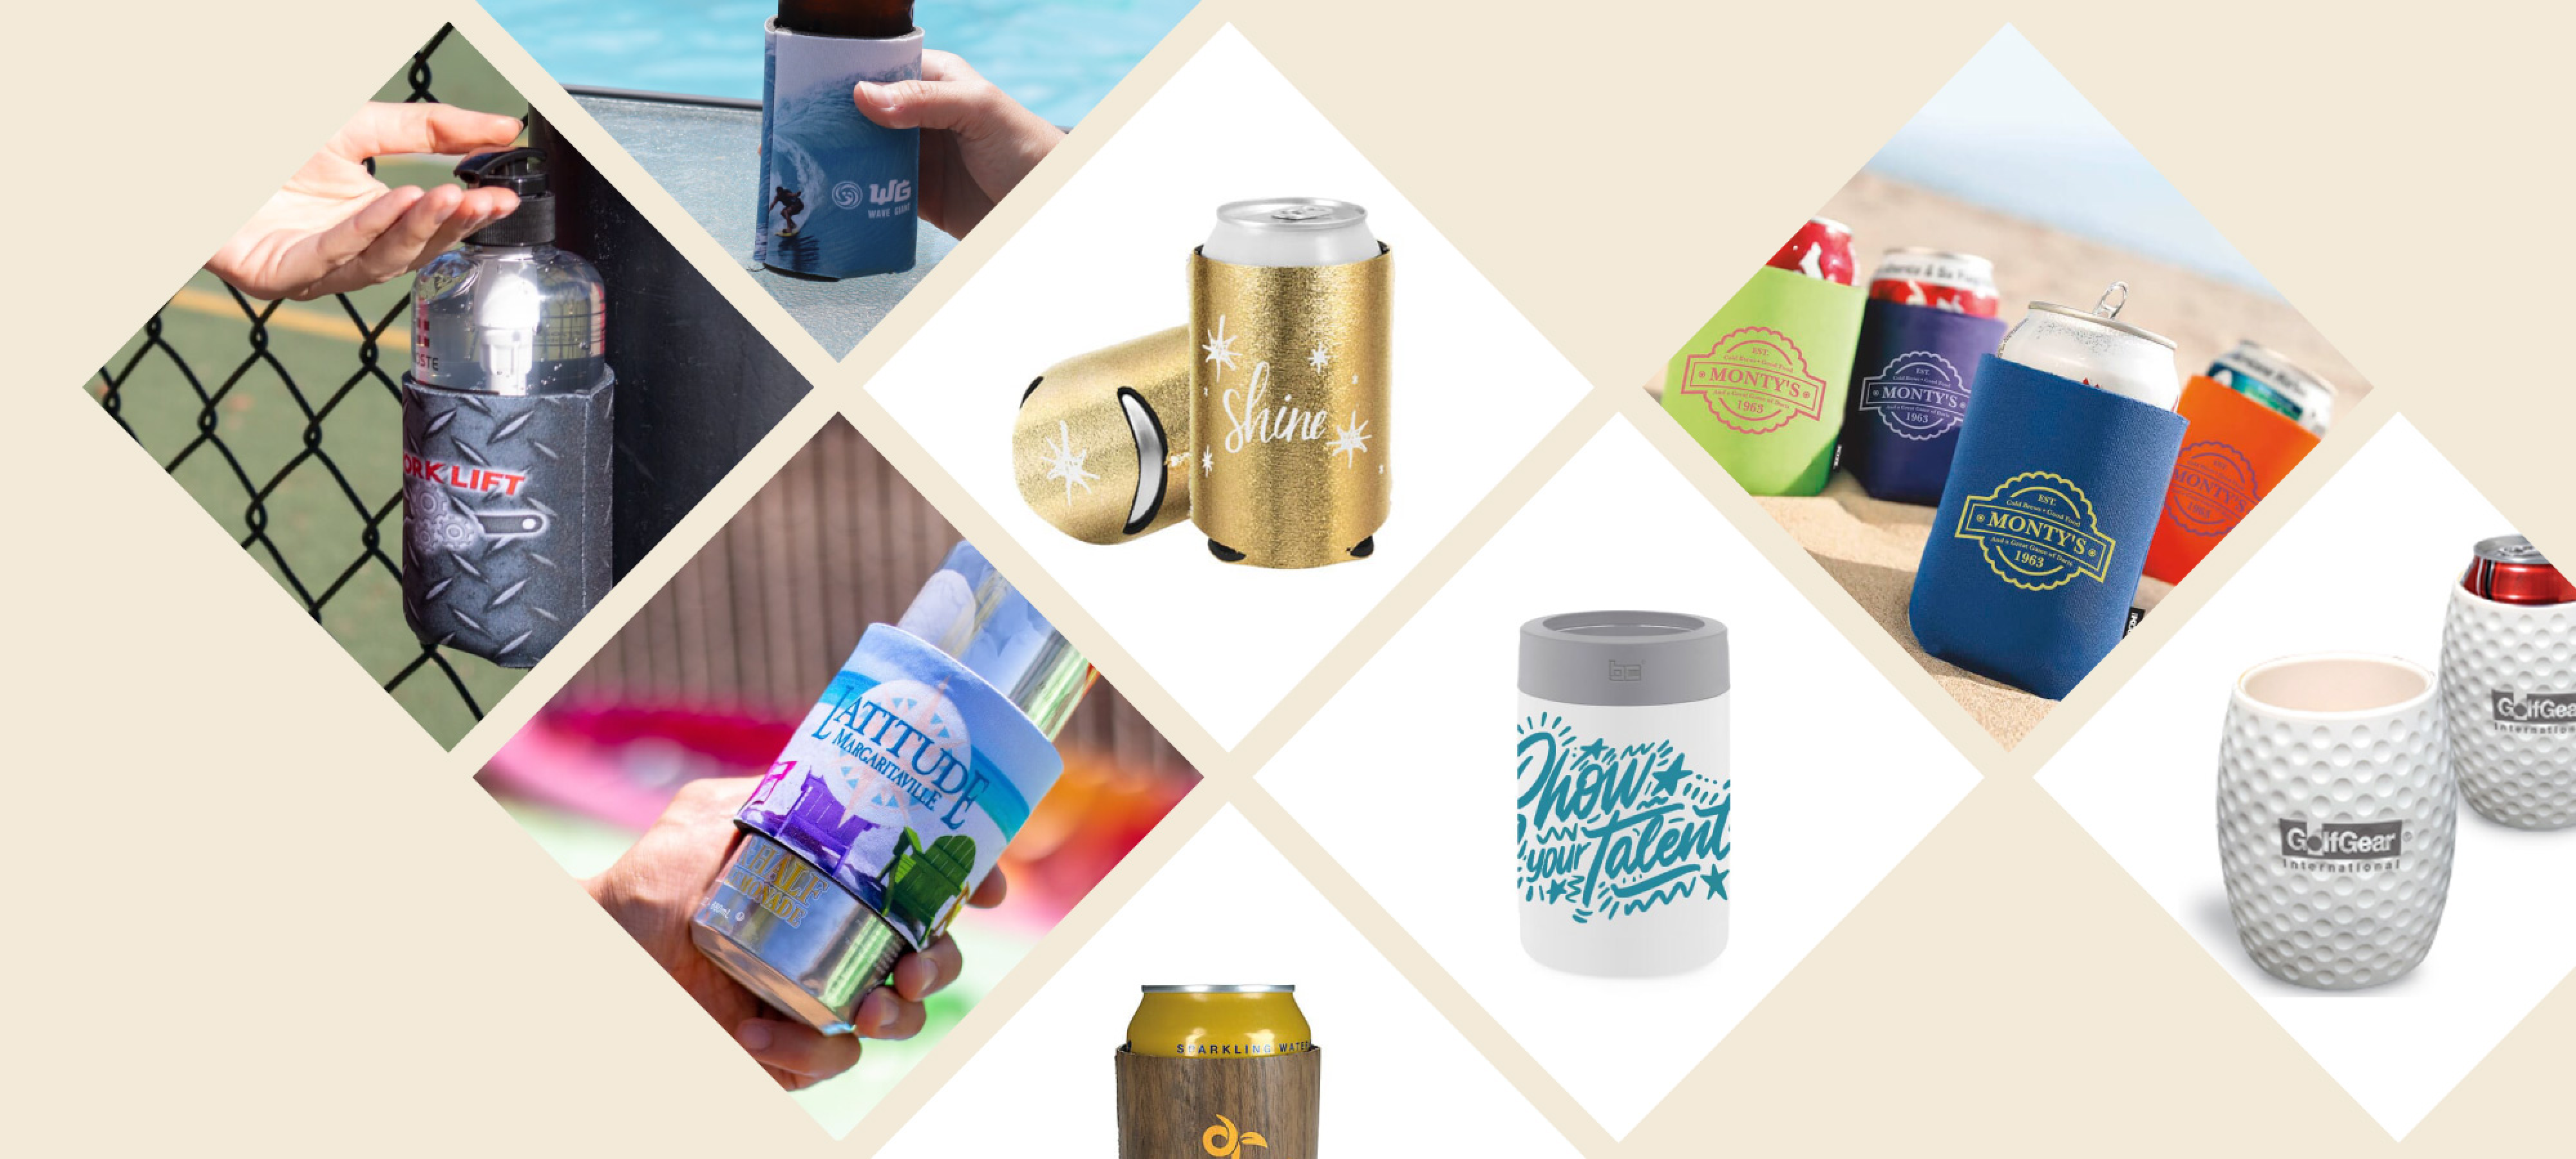 Keep it Cool with Custom Koozies and Can Coolers | Geiger.com